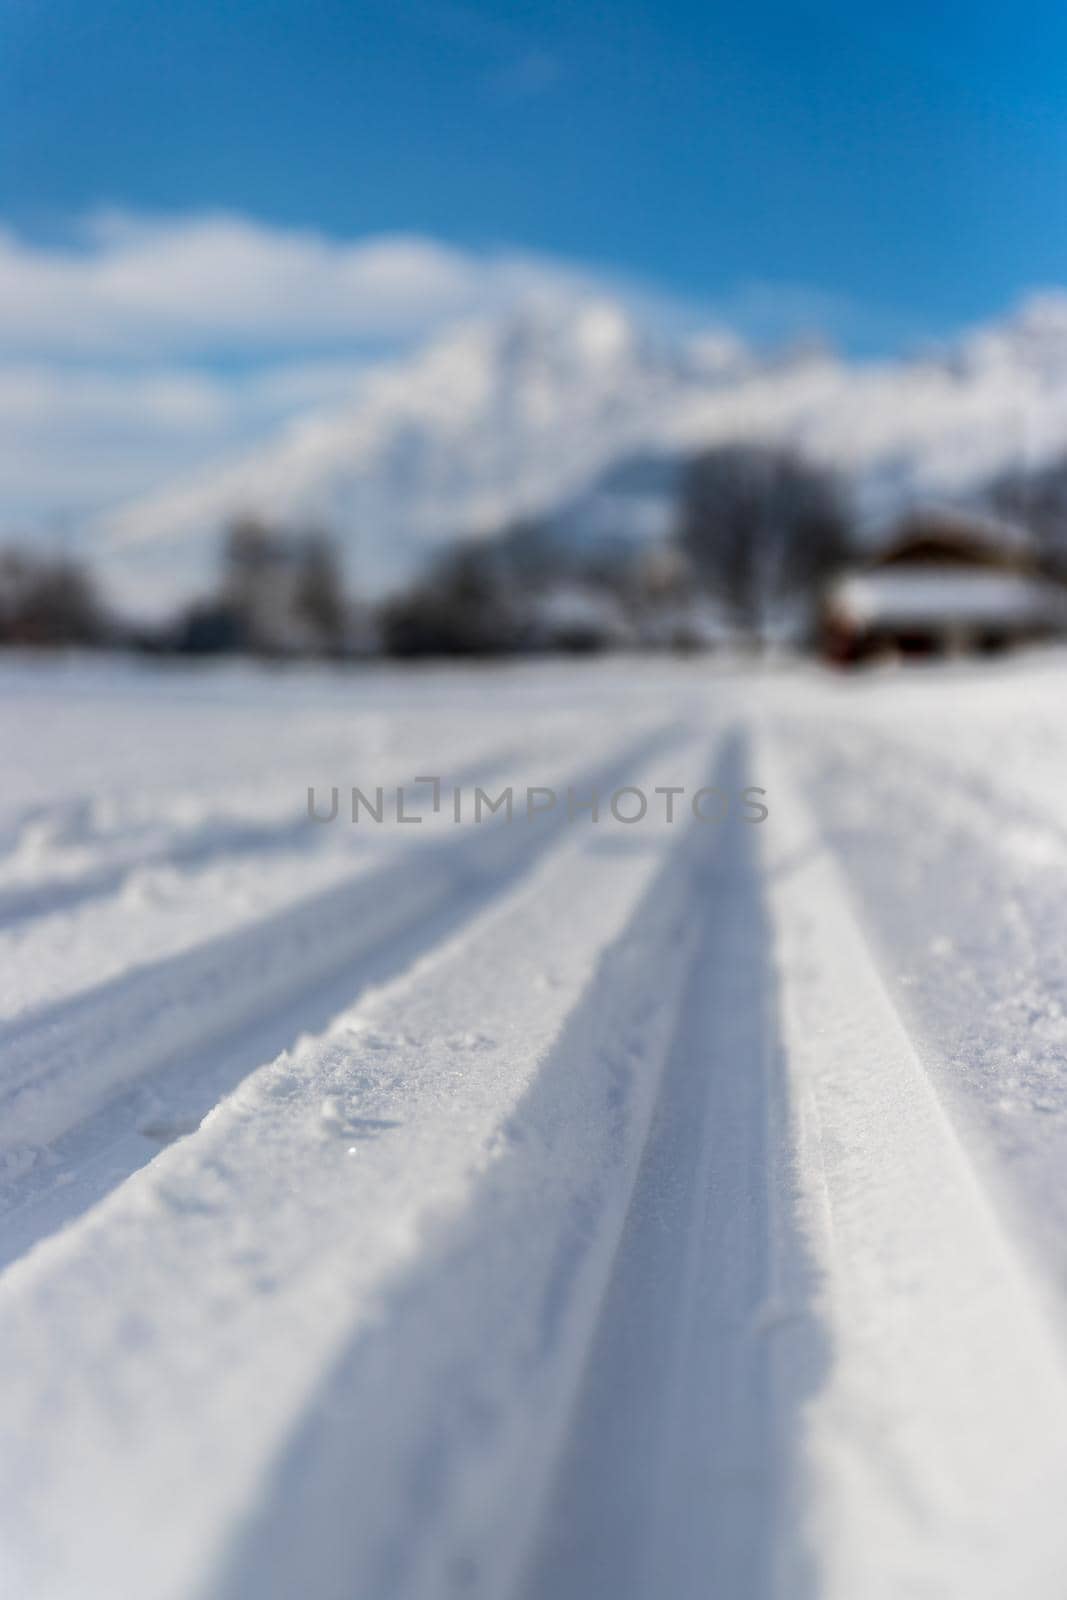 Cross-country skiing in Austria: Slope, fresh white powder snow and mountains, blurry background by Daxenbichler